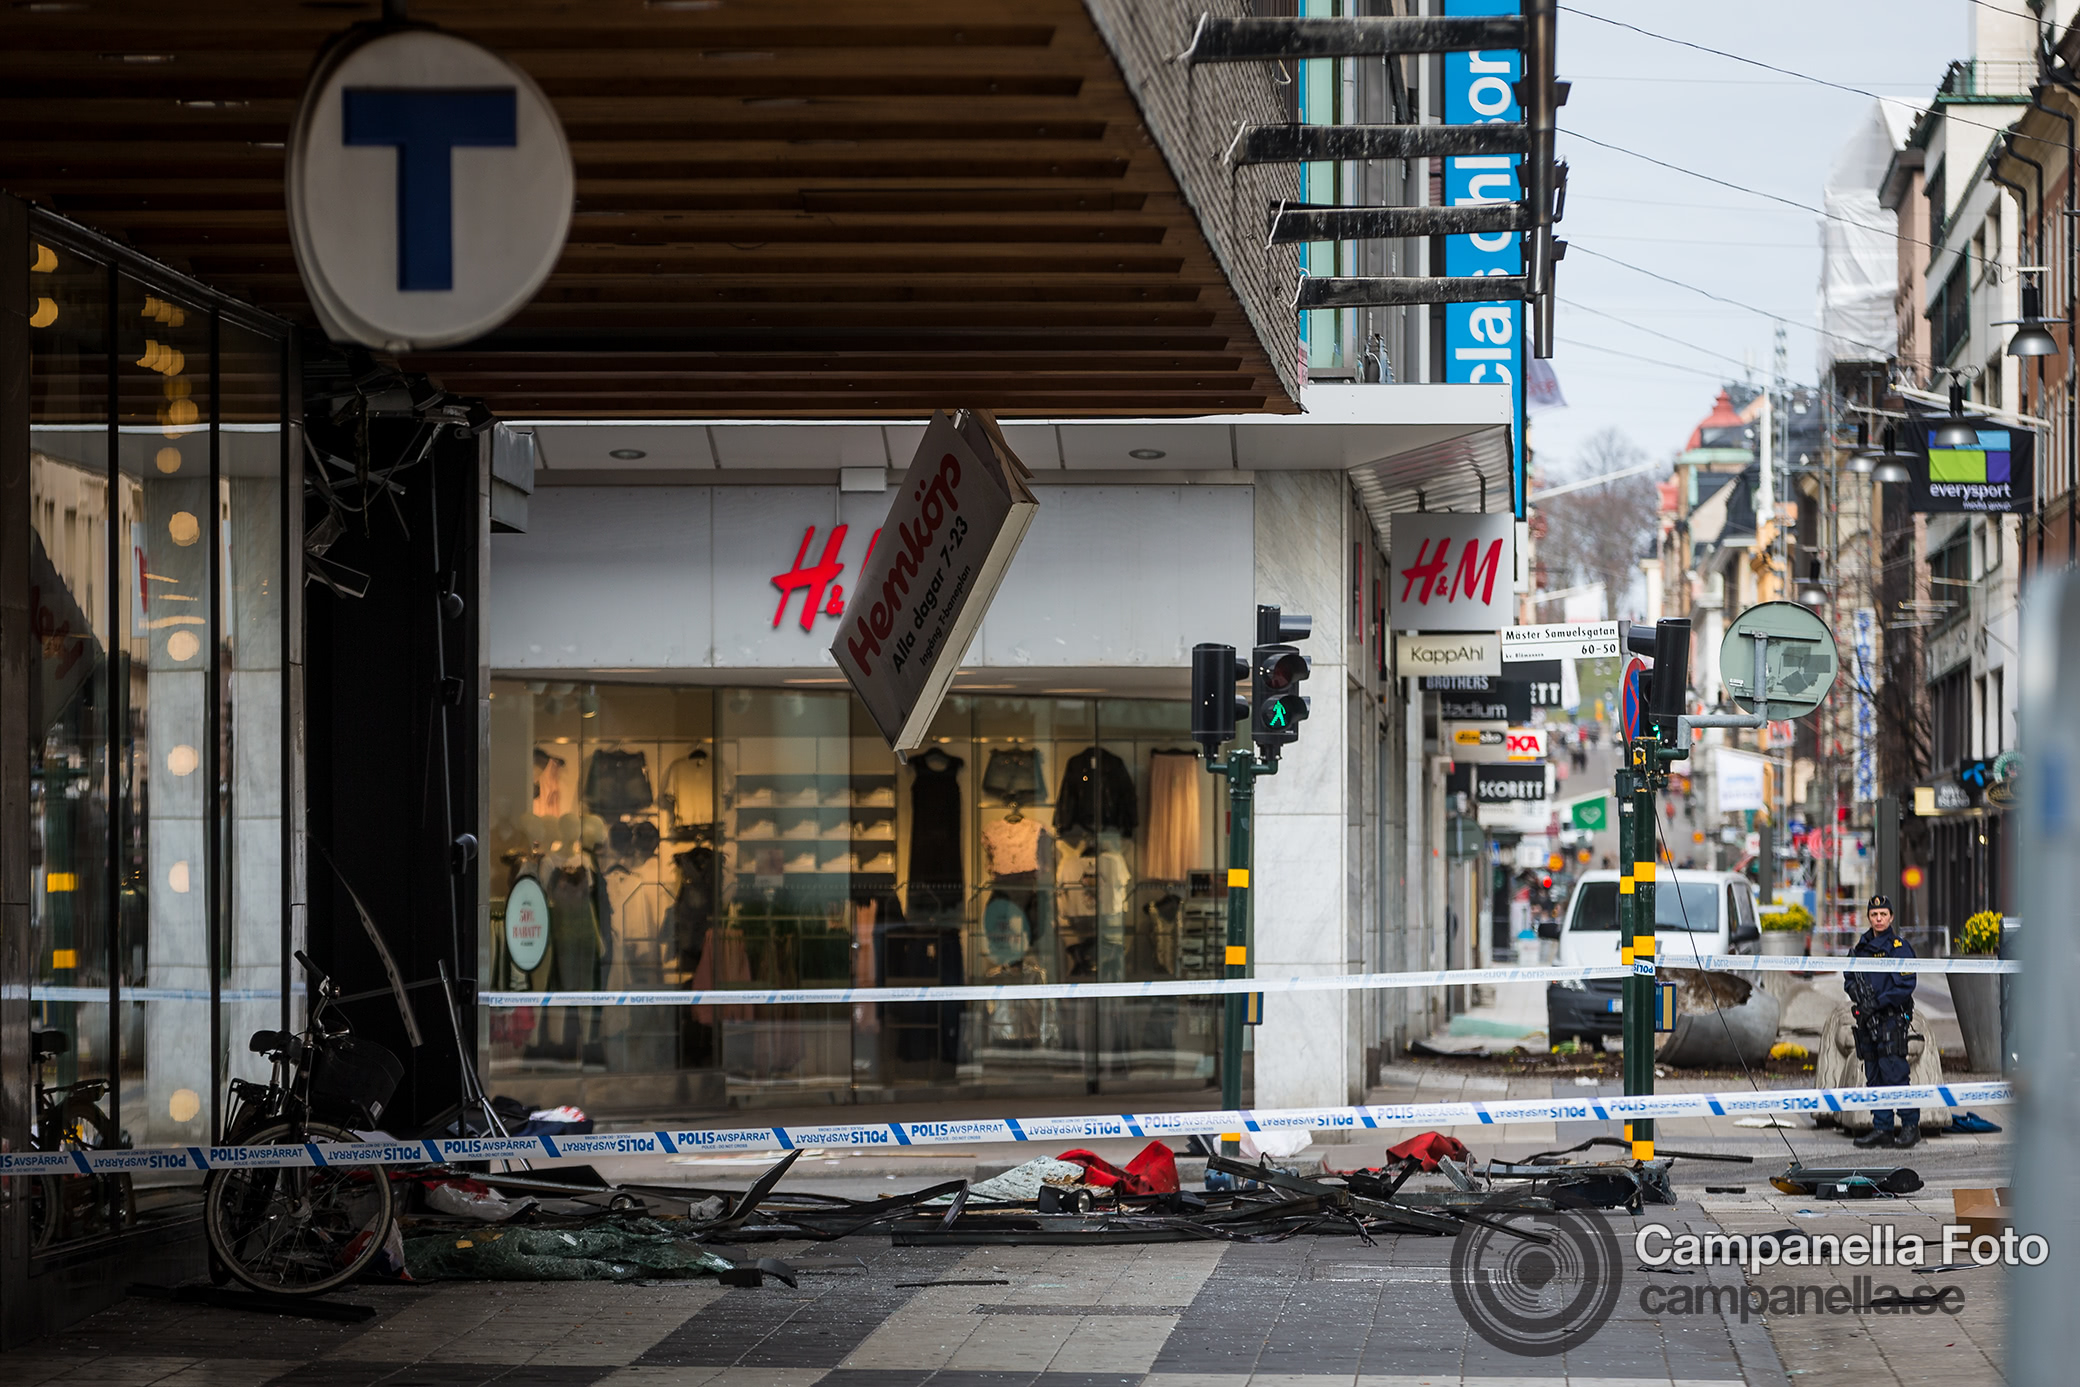 Aftermath of the Stockholm terrorist attack - Michael Campanella Photography